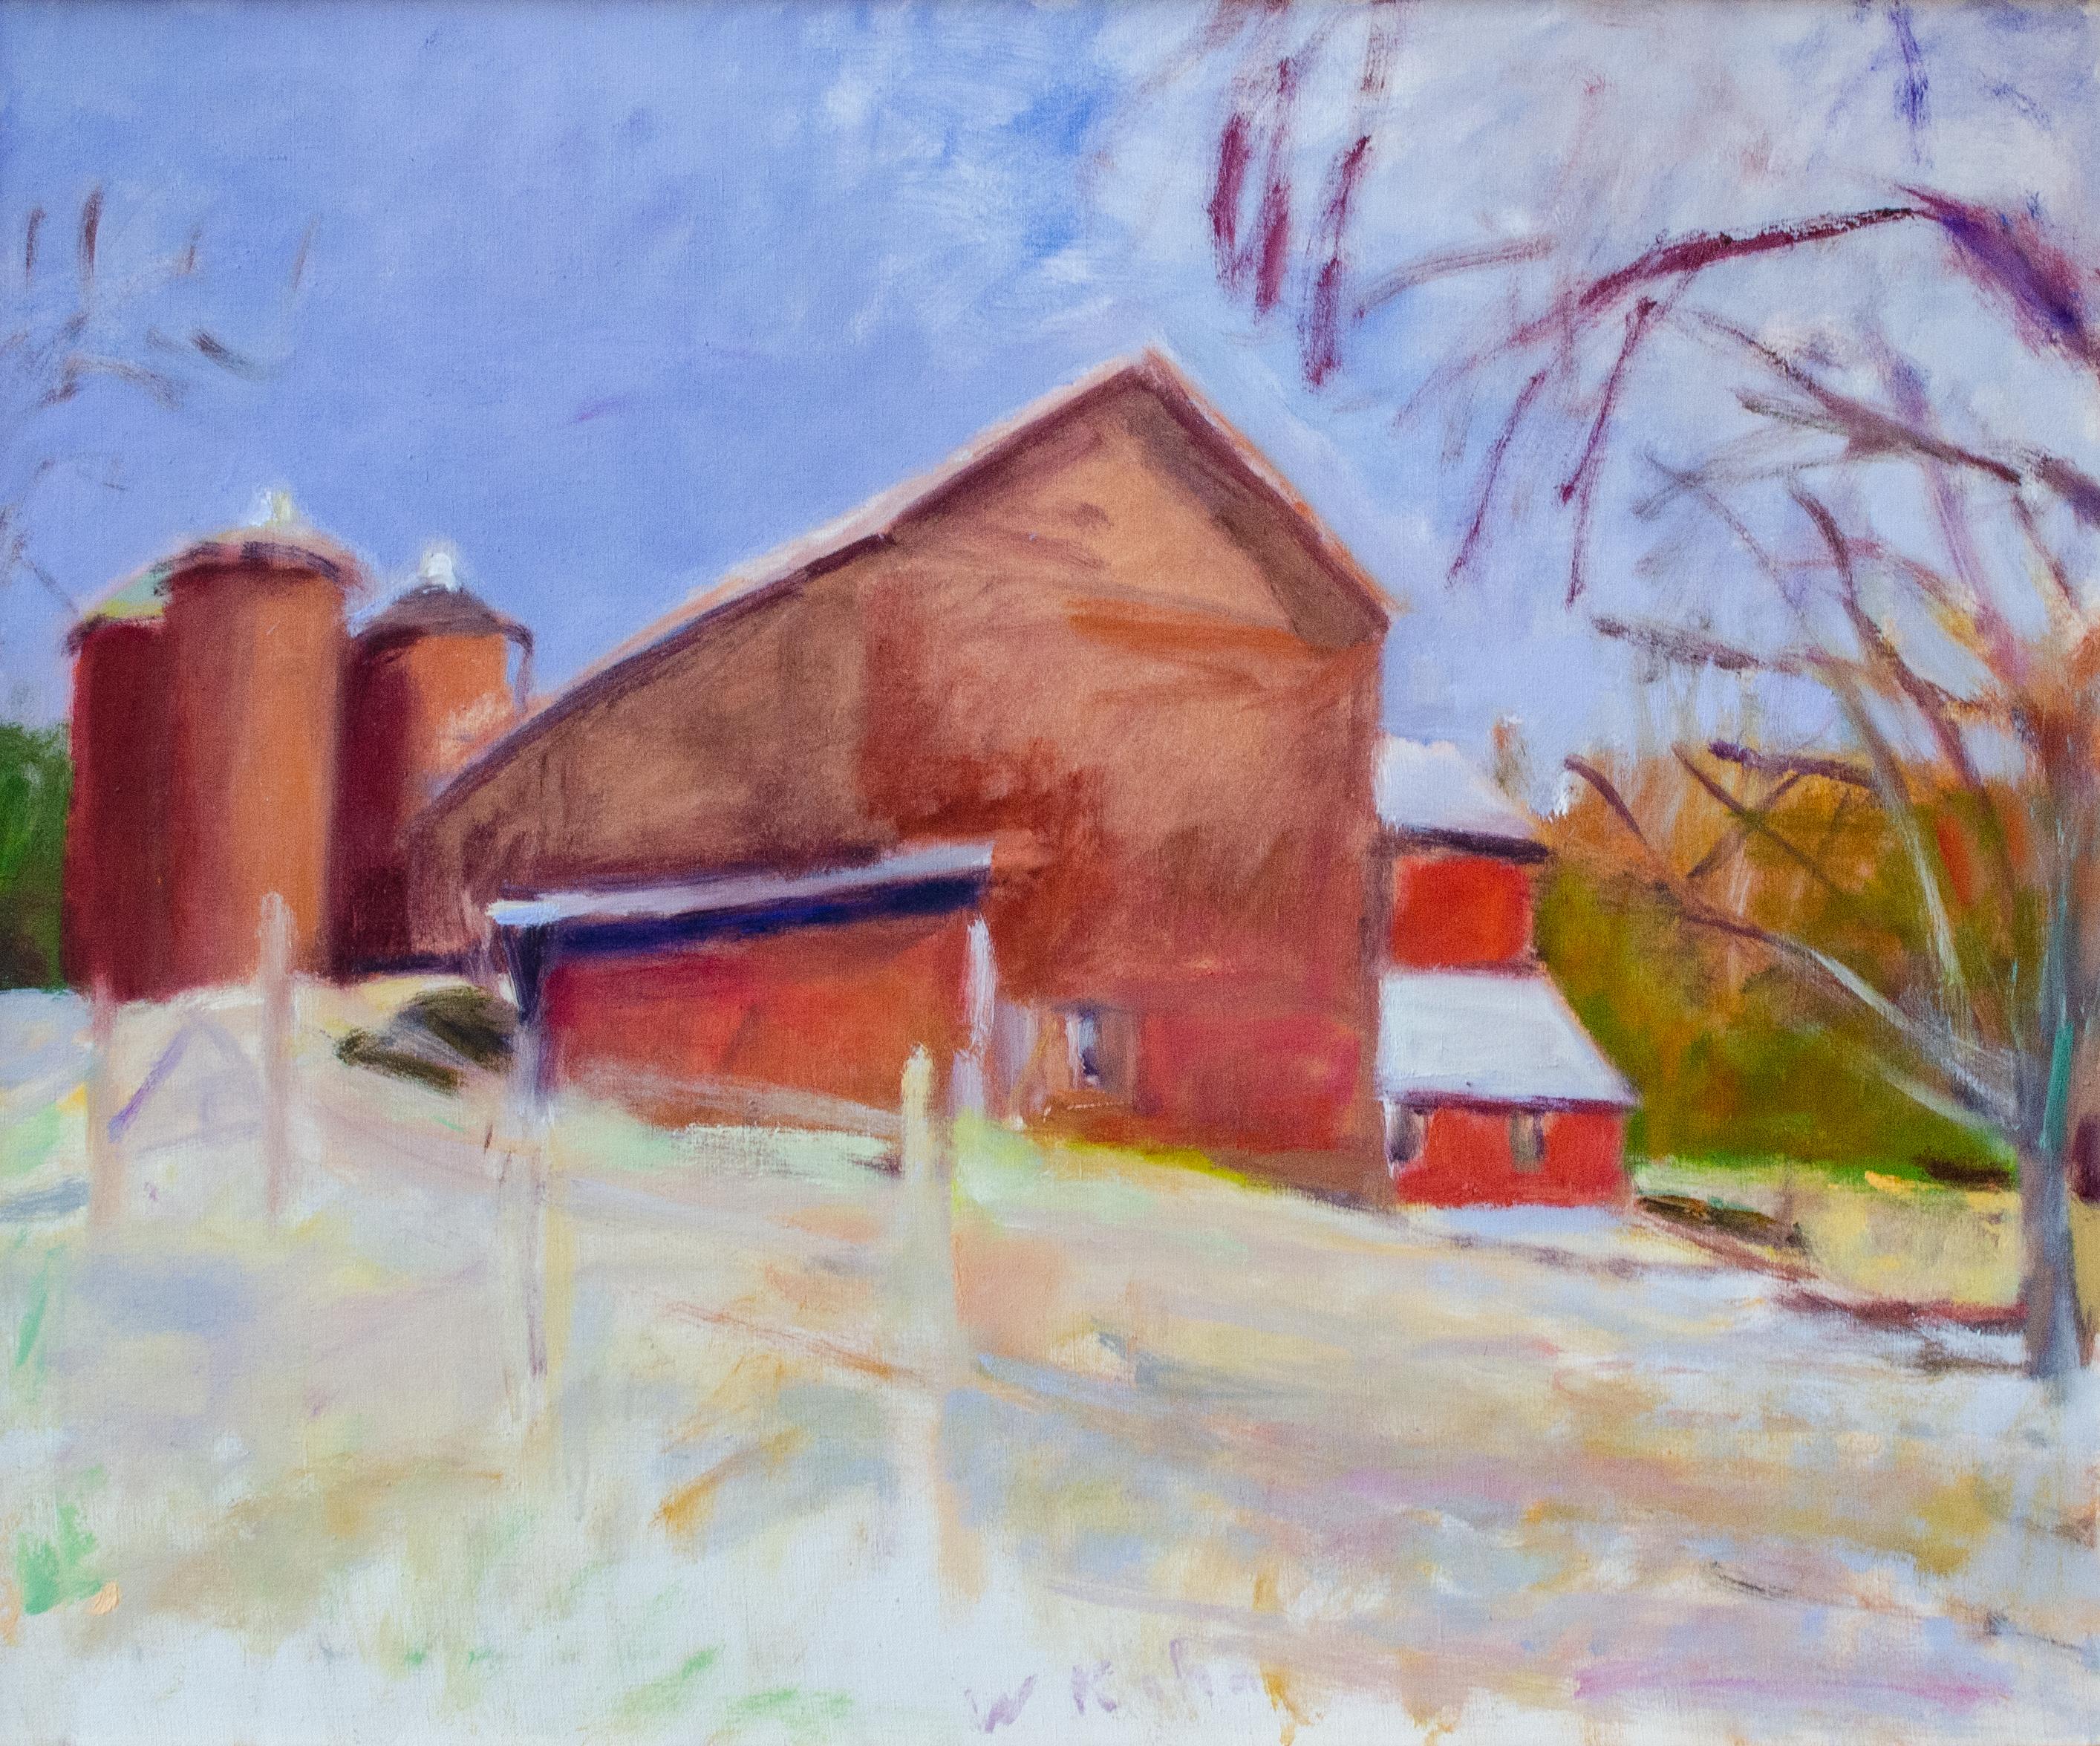 Wolf Kahn
Barns and Silos in New Jersey, 1985
Signed lower center
Oil on canvas
28 x 34 inches

An important member of the second generation New York School, Wolf Kahn is renowned for his luminous, richly colored landscapes. Focusing on such